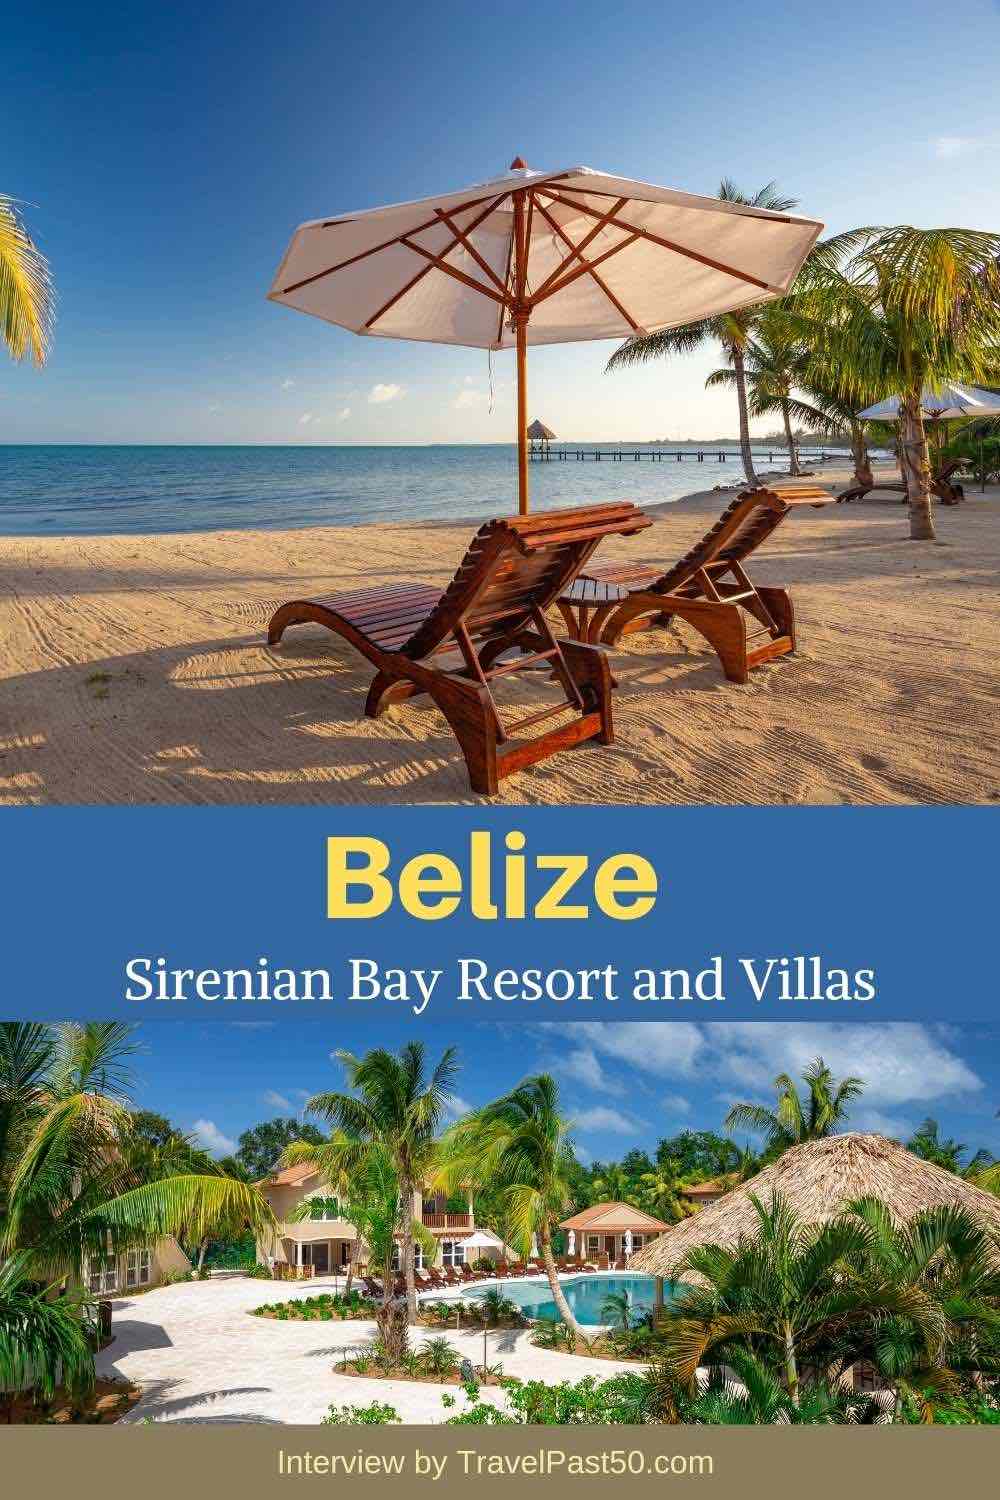 Building a Belize Resort in the Year 2020 - Travel Past 50